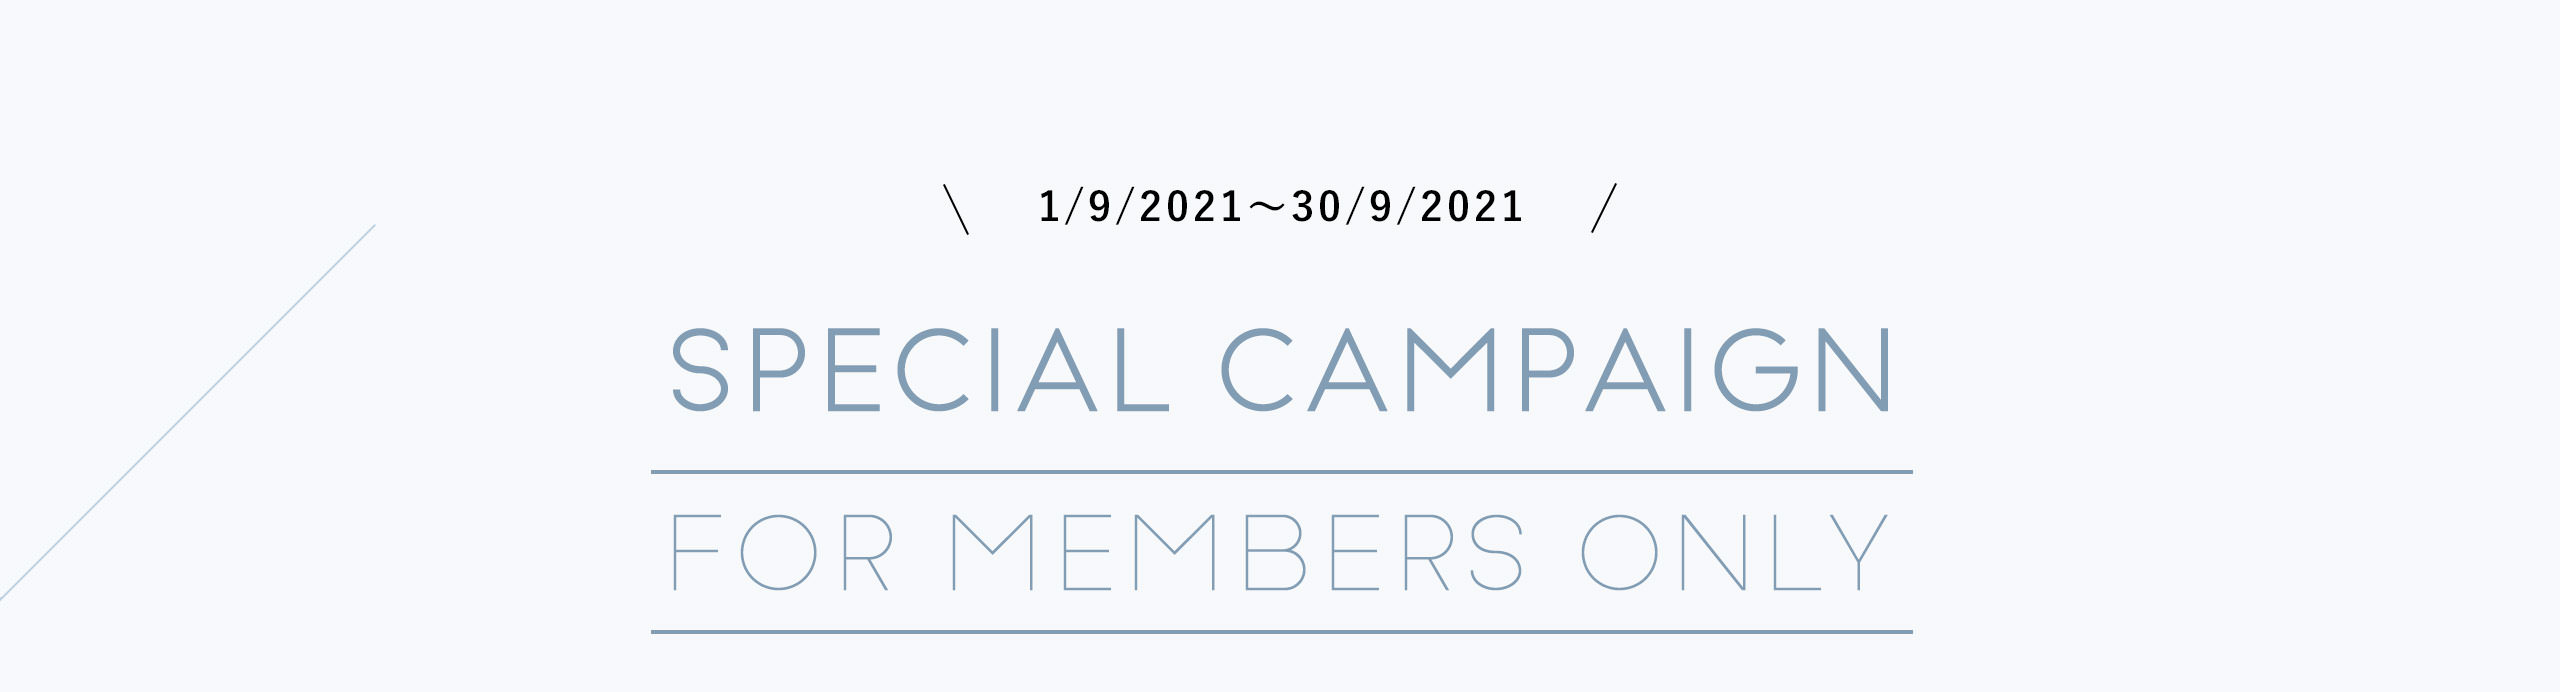 1/9/2021～30/9/2021 Special Campaign for members only